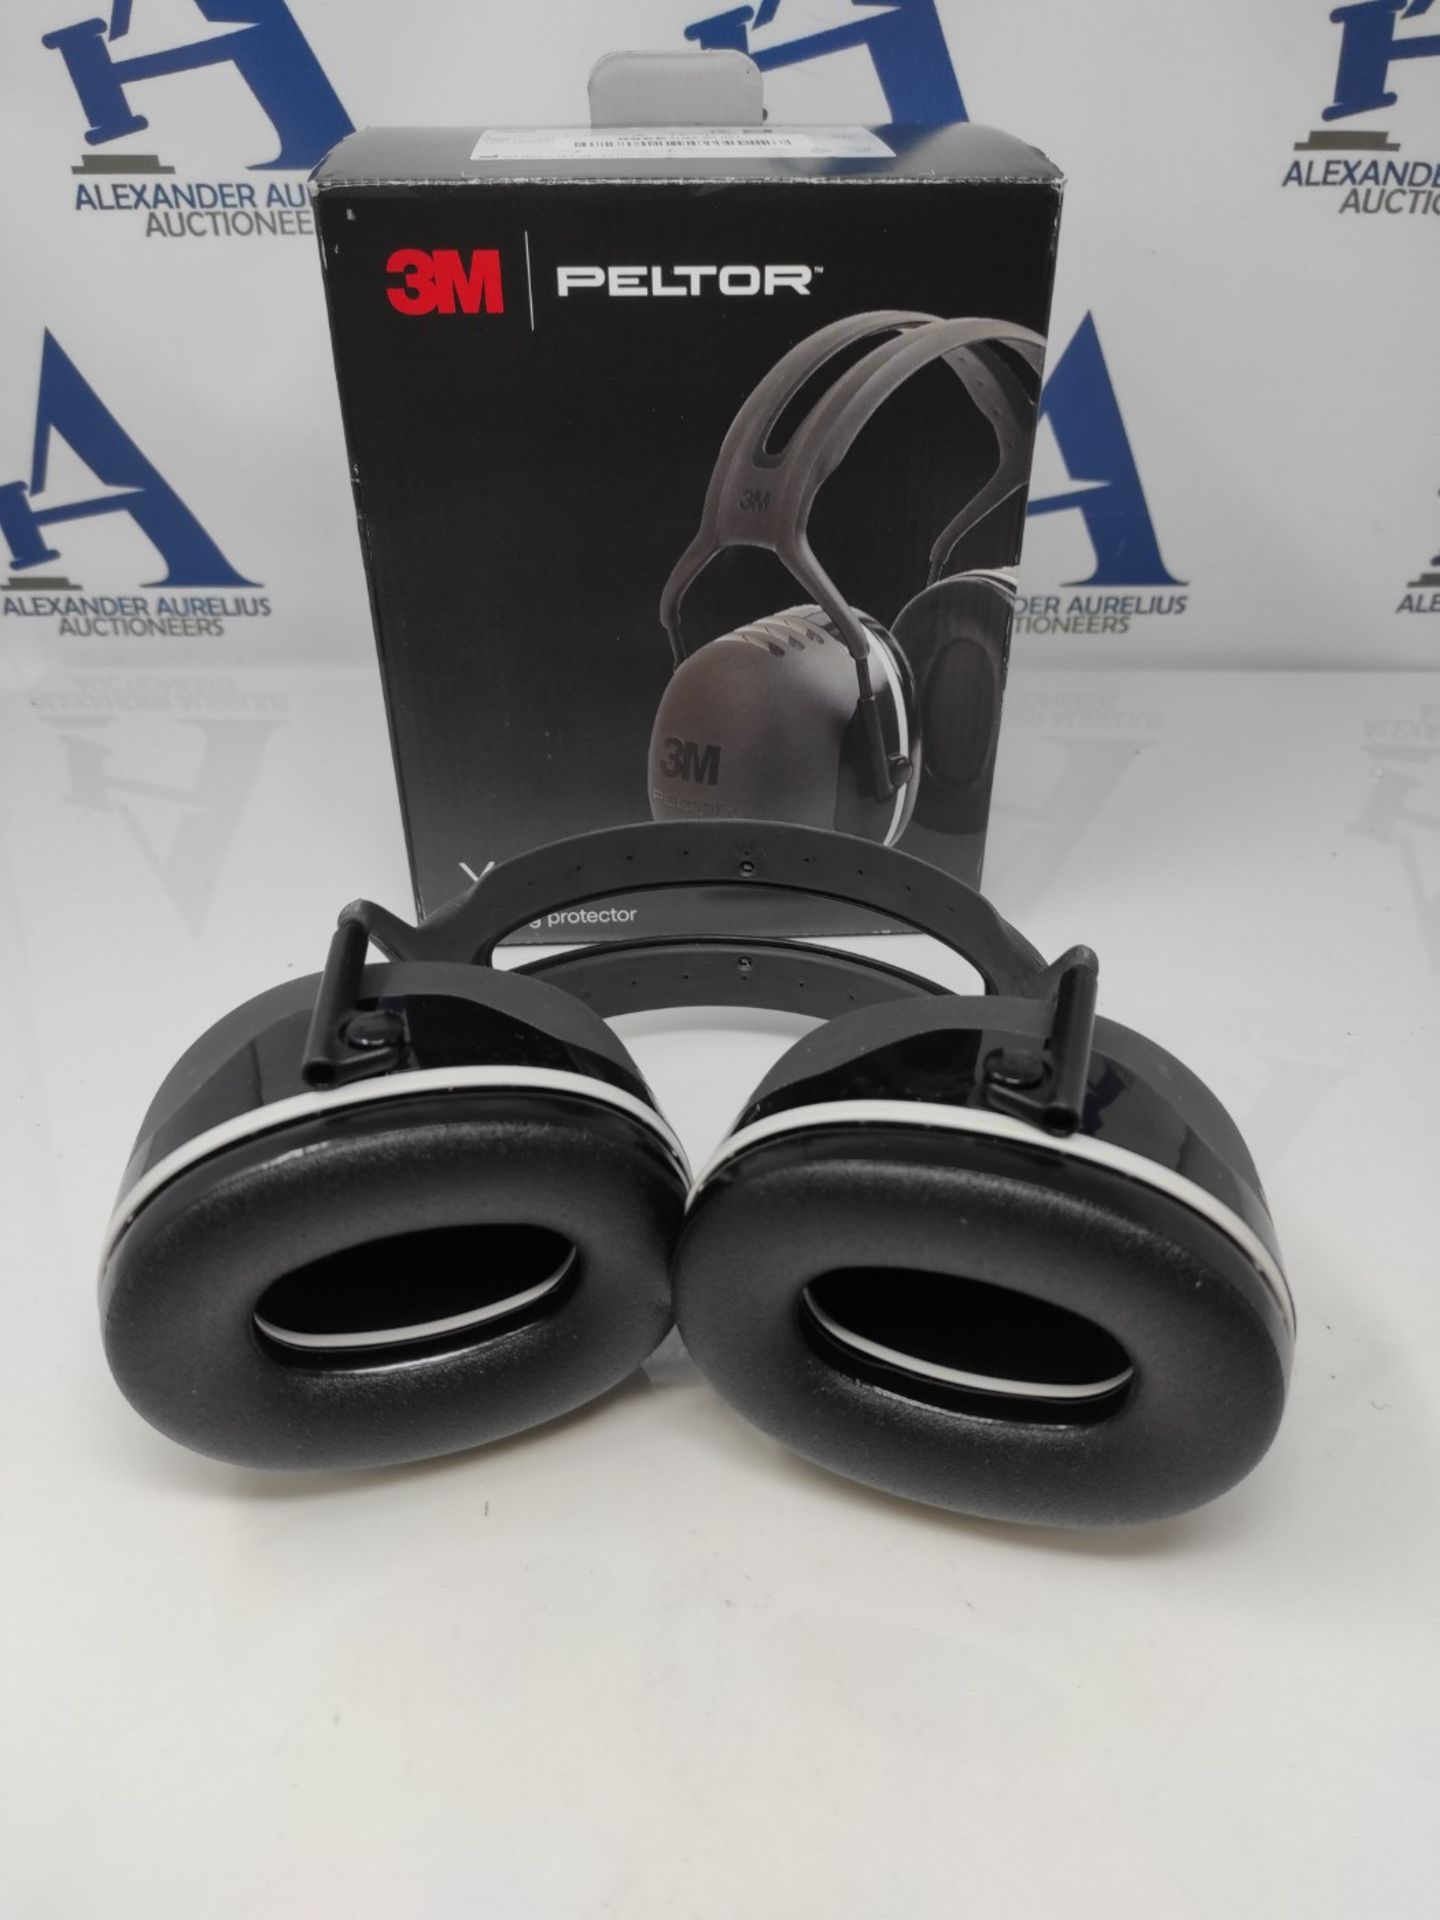 3M Peltor X5A Ear Defenders with Headband, Earmuffs for Reliable Hearing Protection Ag - Image 2 of 2